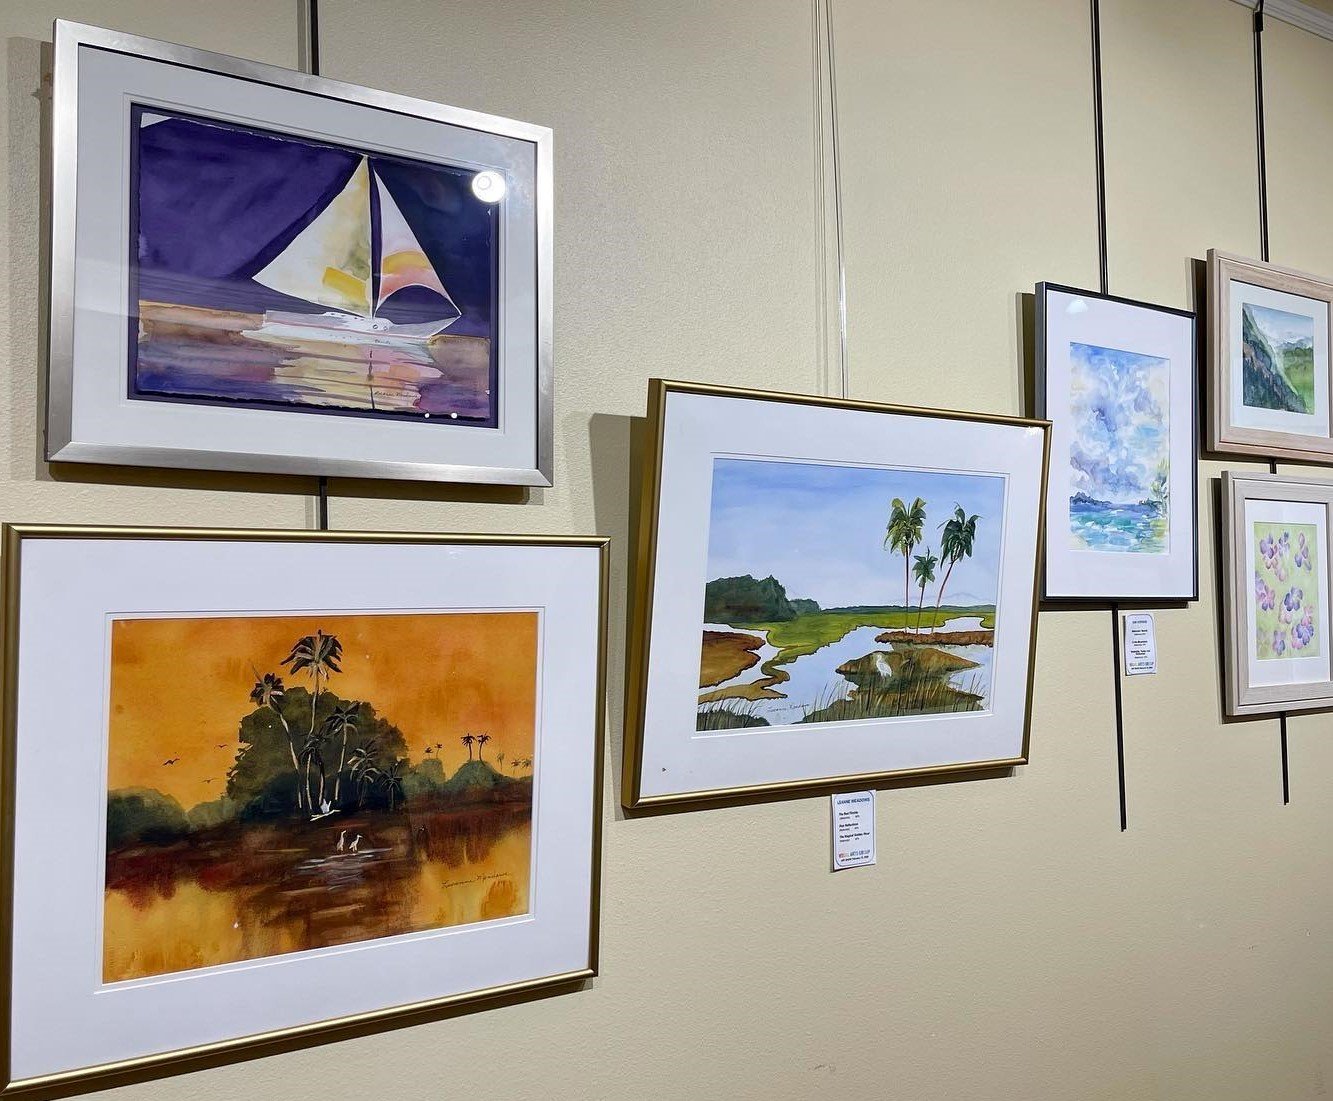 Several paintings at Cypress Village’s Visual Arts Show were done in watercolor.